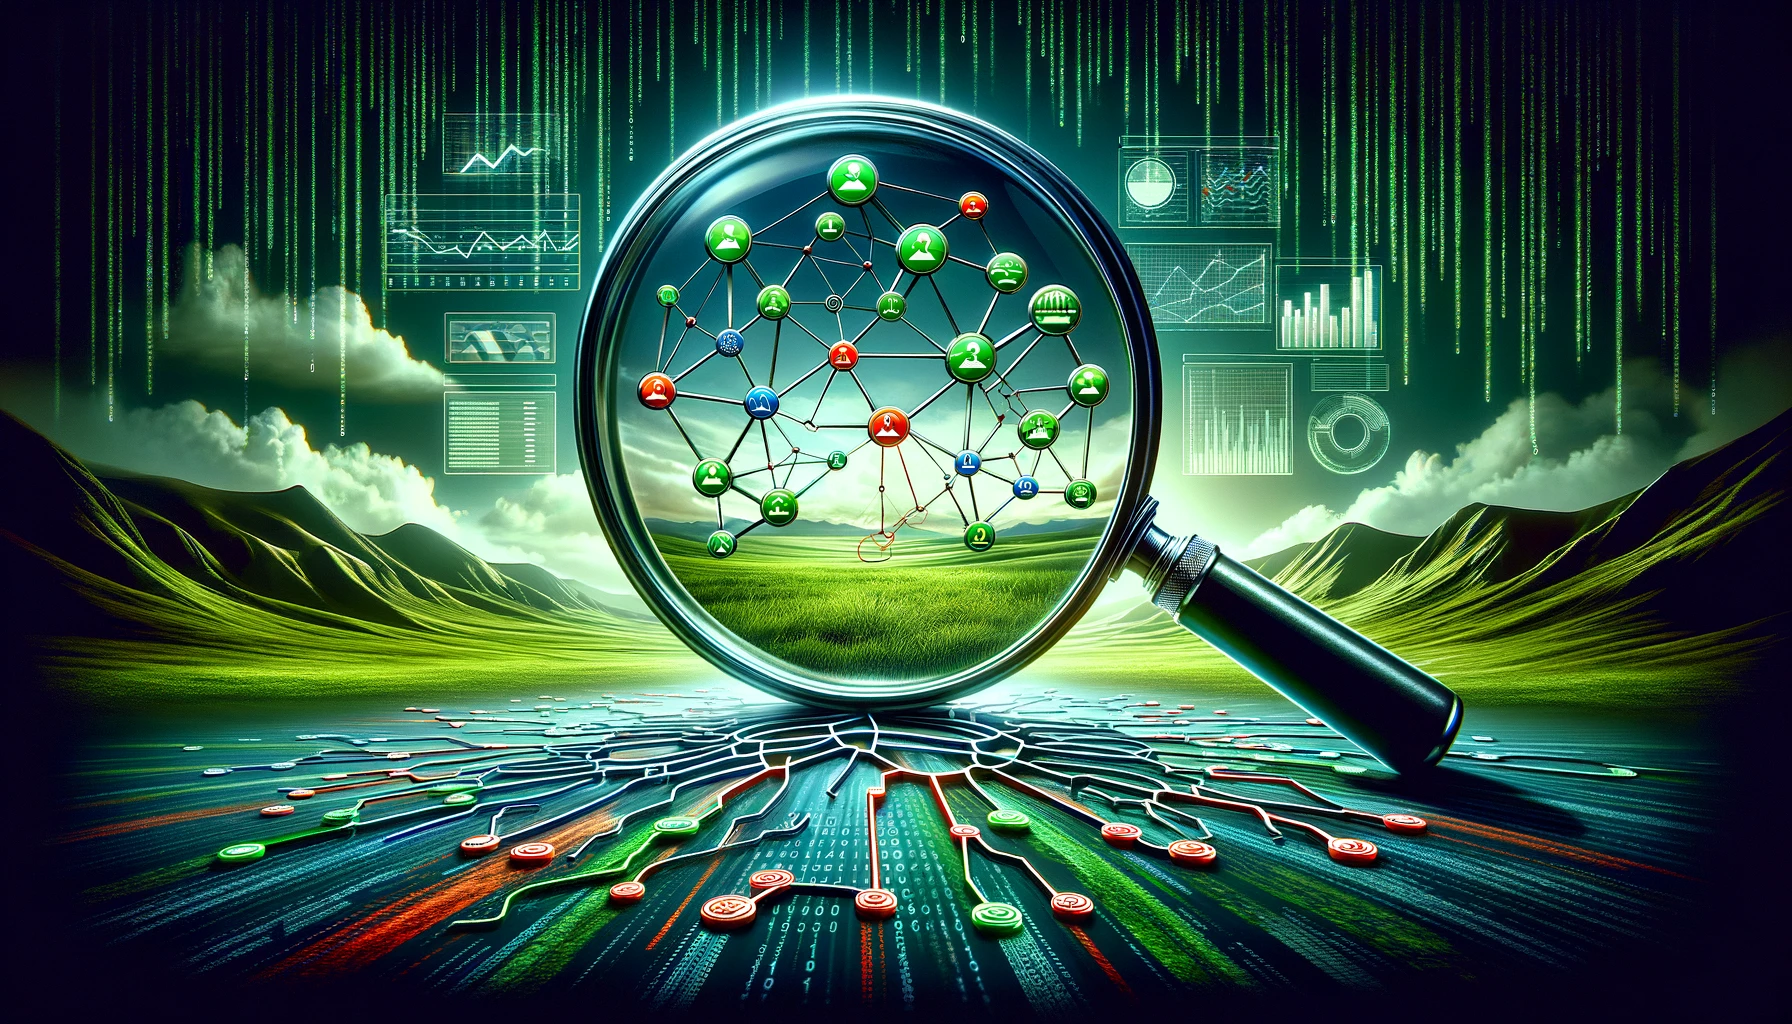 An intricate depiction of Link Profile Analysis with a magnifying glass highlighting the contrast between green, healthy links and red, broken ones against a backdrop of digital data analysis patterns.